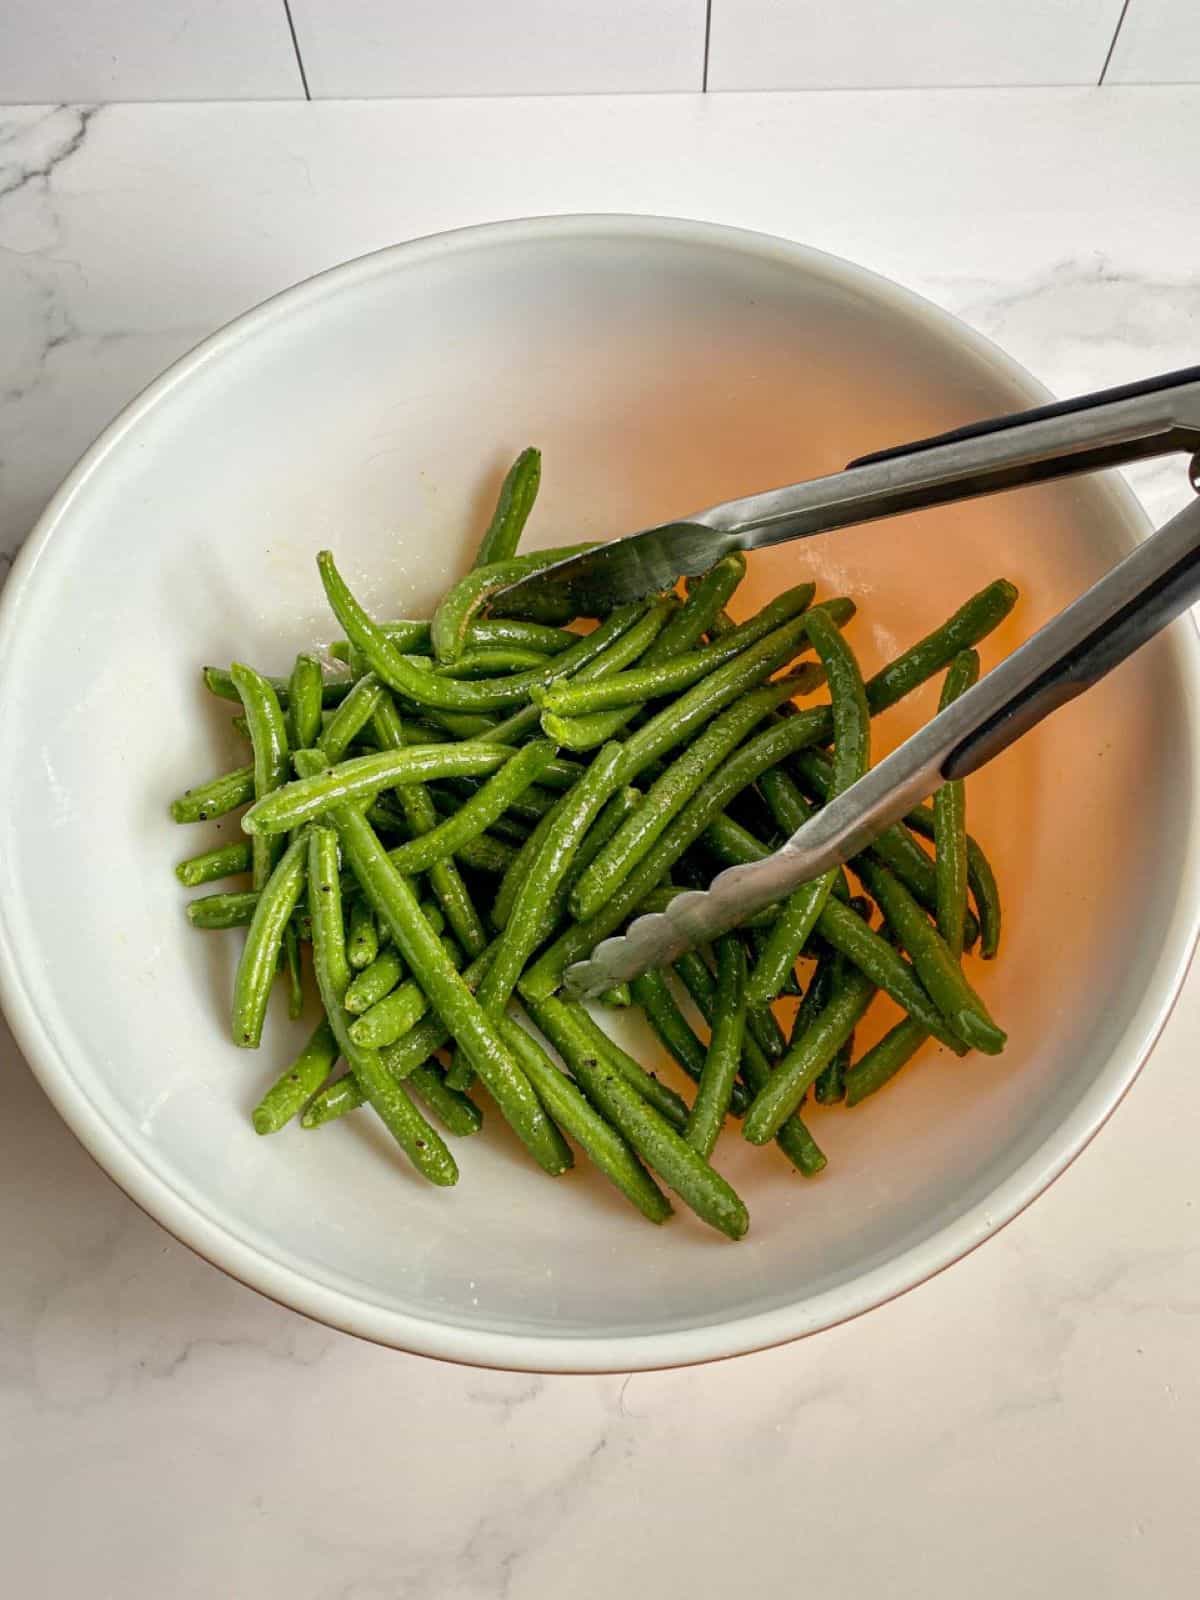 Seasoned green beans in a mixing bowl with tongs.